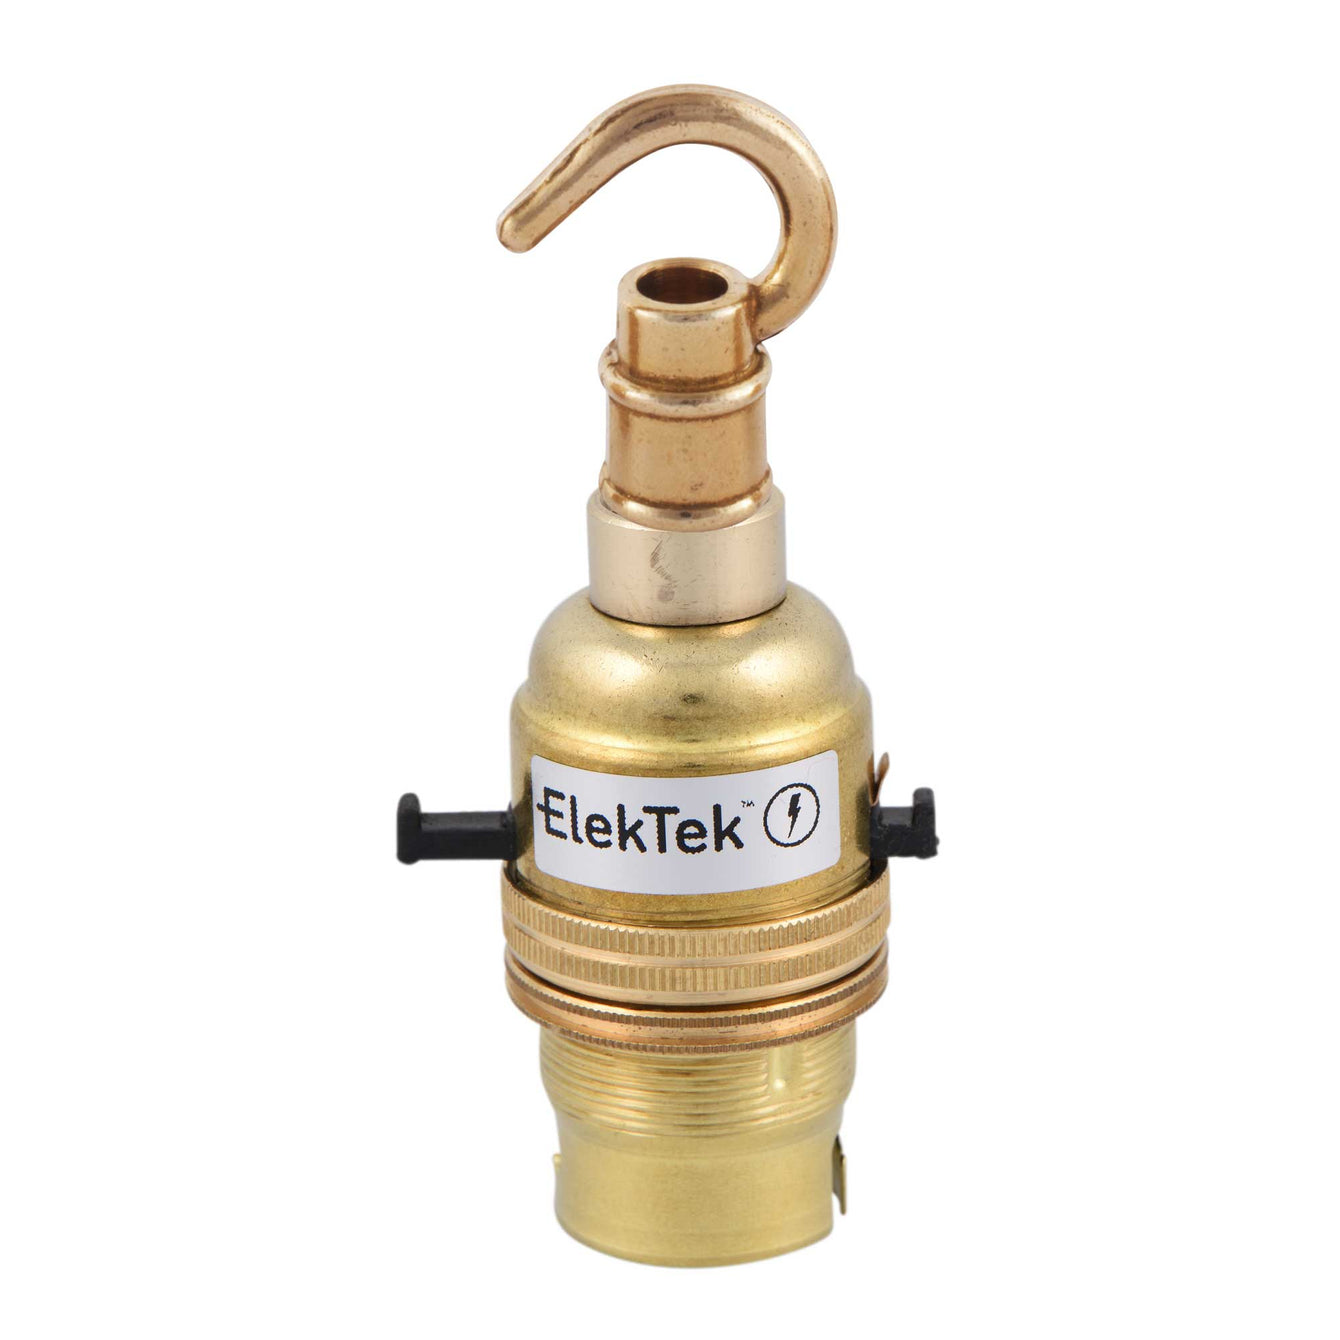 ElekTek Patented Safety Switch Lamp Holder Half Inch Bayonet Cap B22 With Shade Ring and Hook Solid Brass Antique Brass